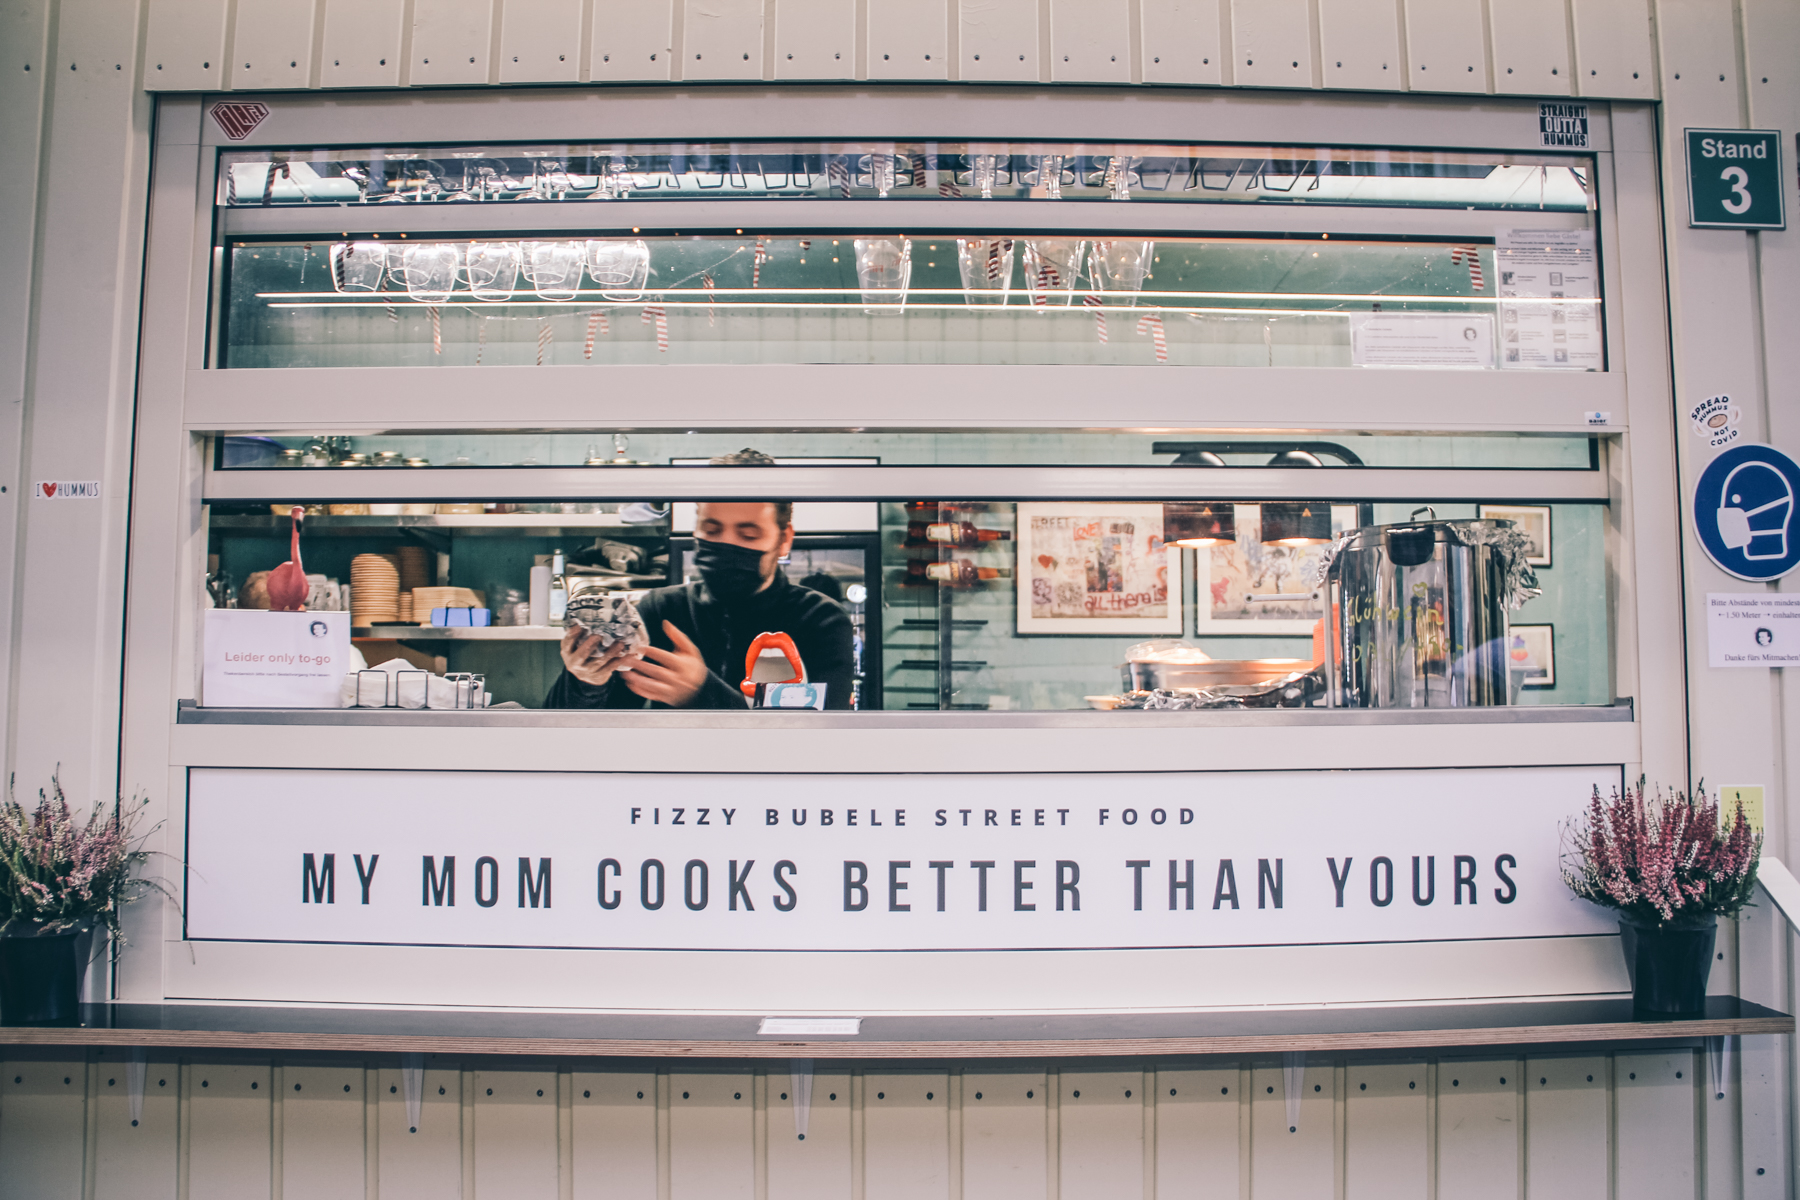 "My mom cooks better than yours." – ©wunderland media GmbH